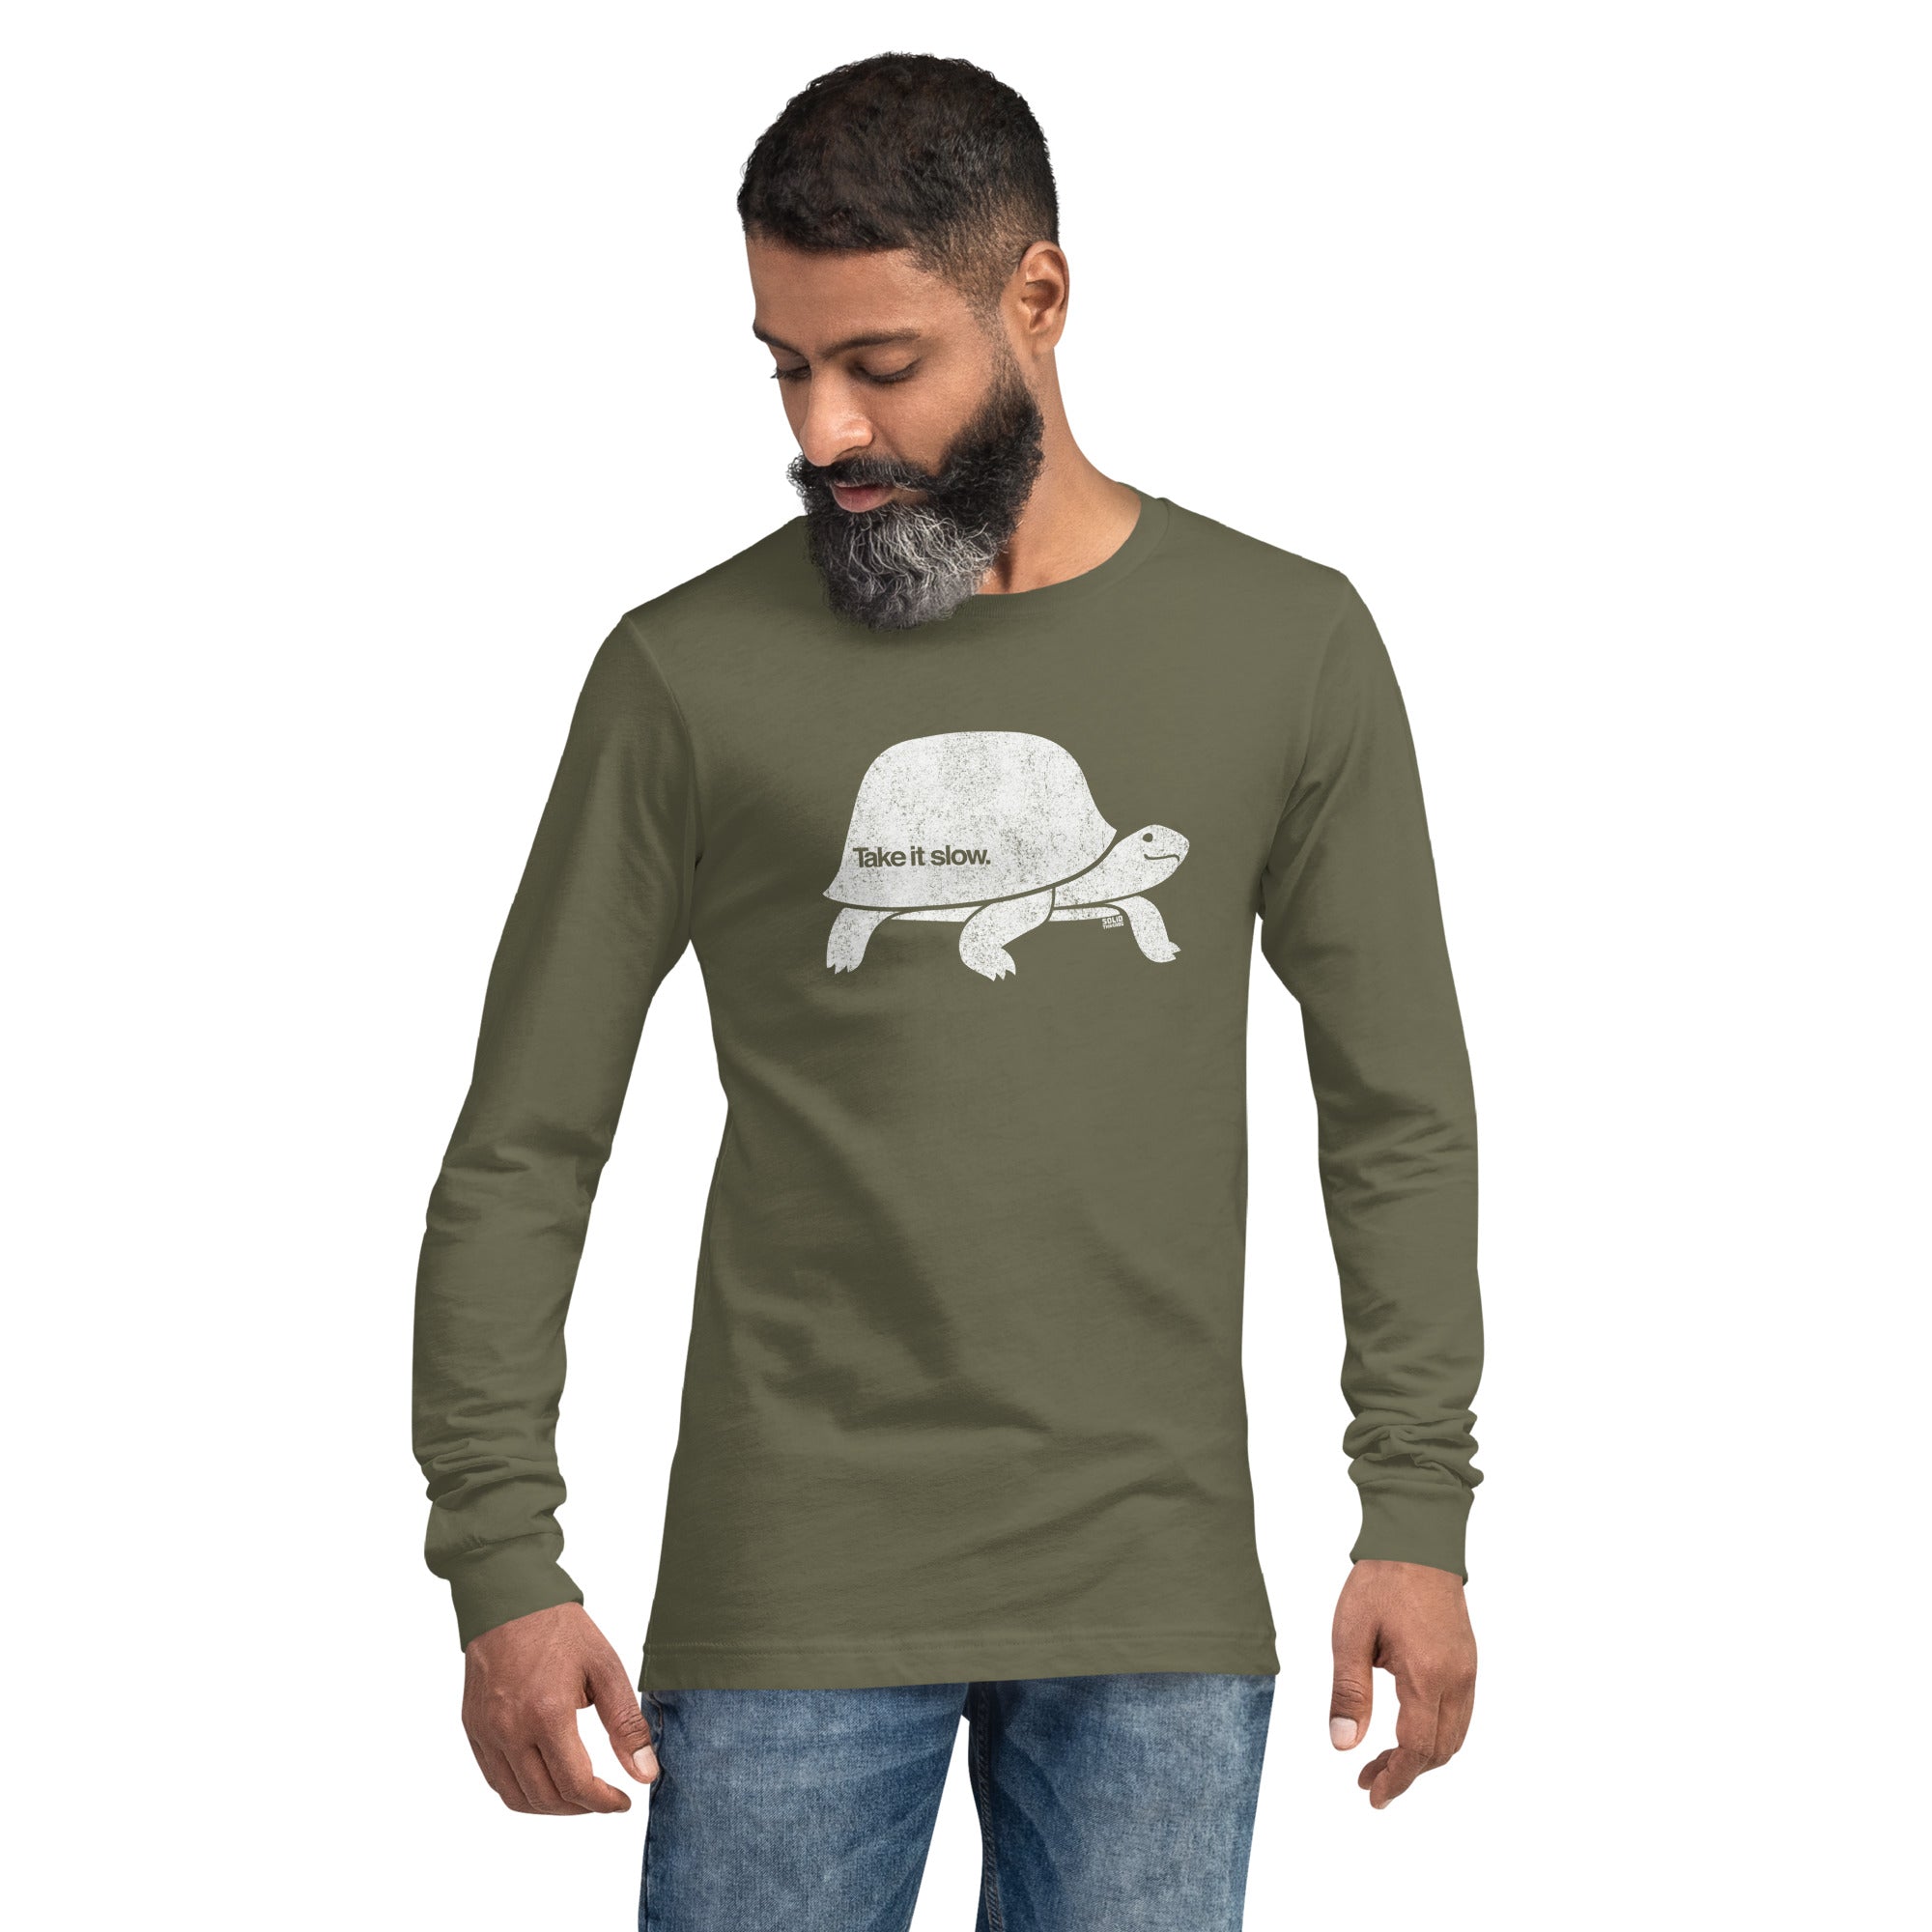 Take It Slow Vintage Graphic Long Sleeve Tee | Funny Turtle T-Shirt | Solid Threads